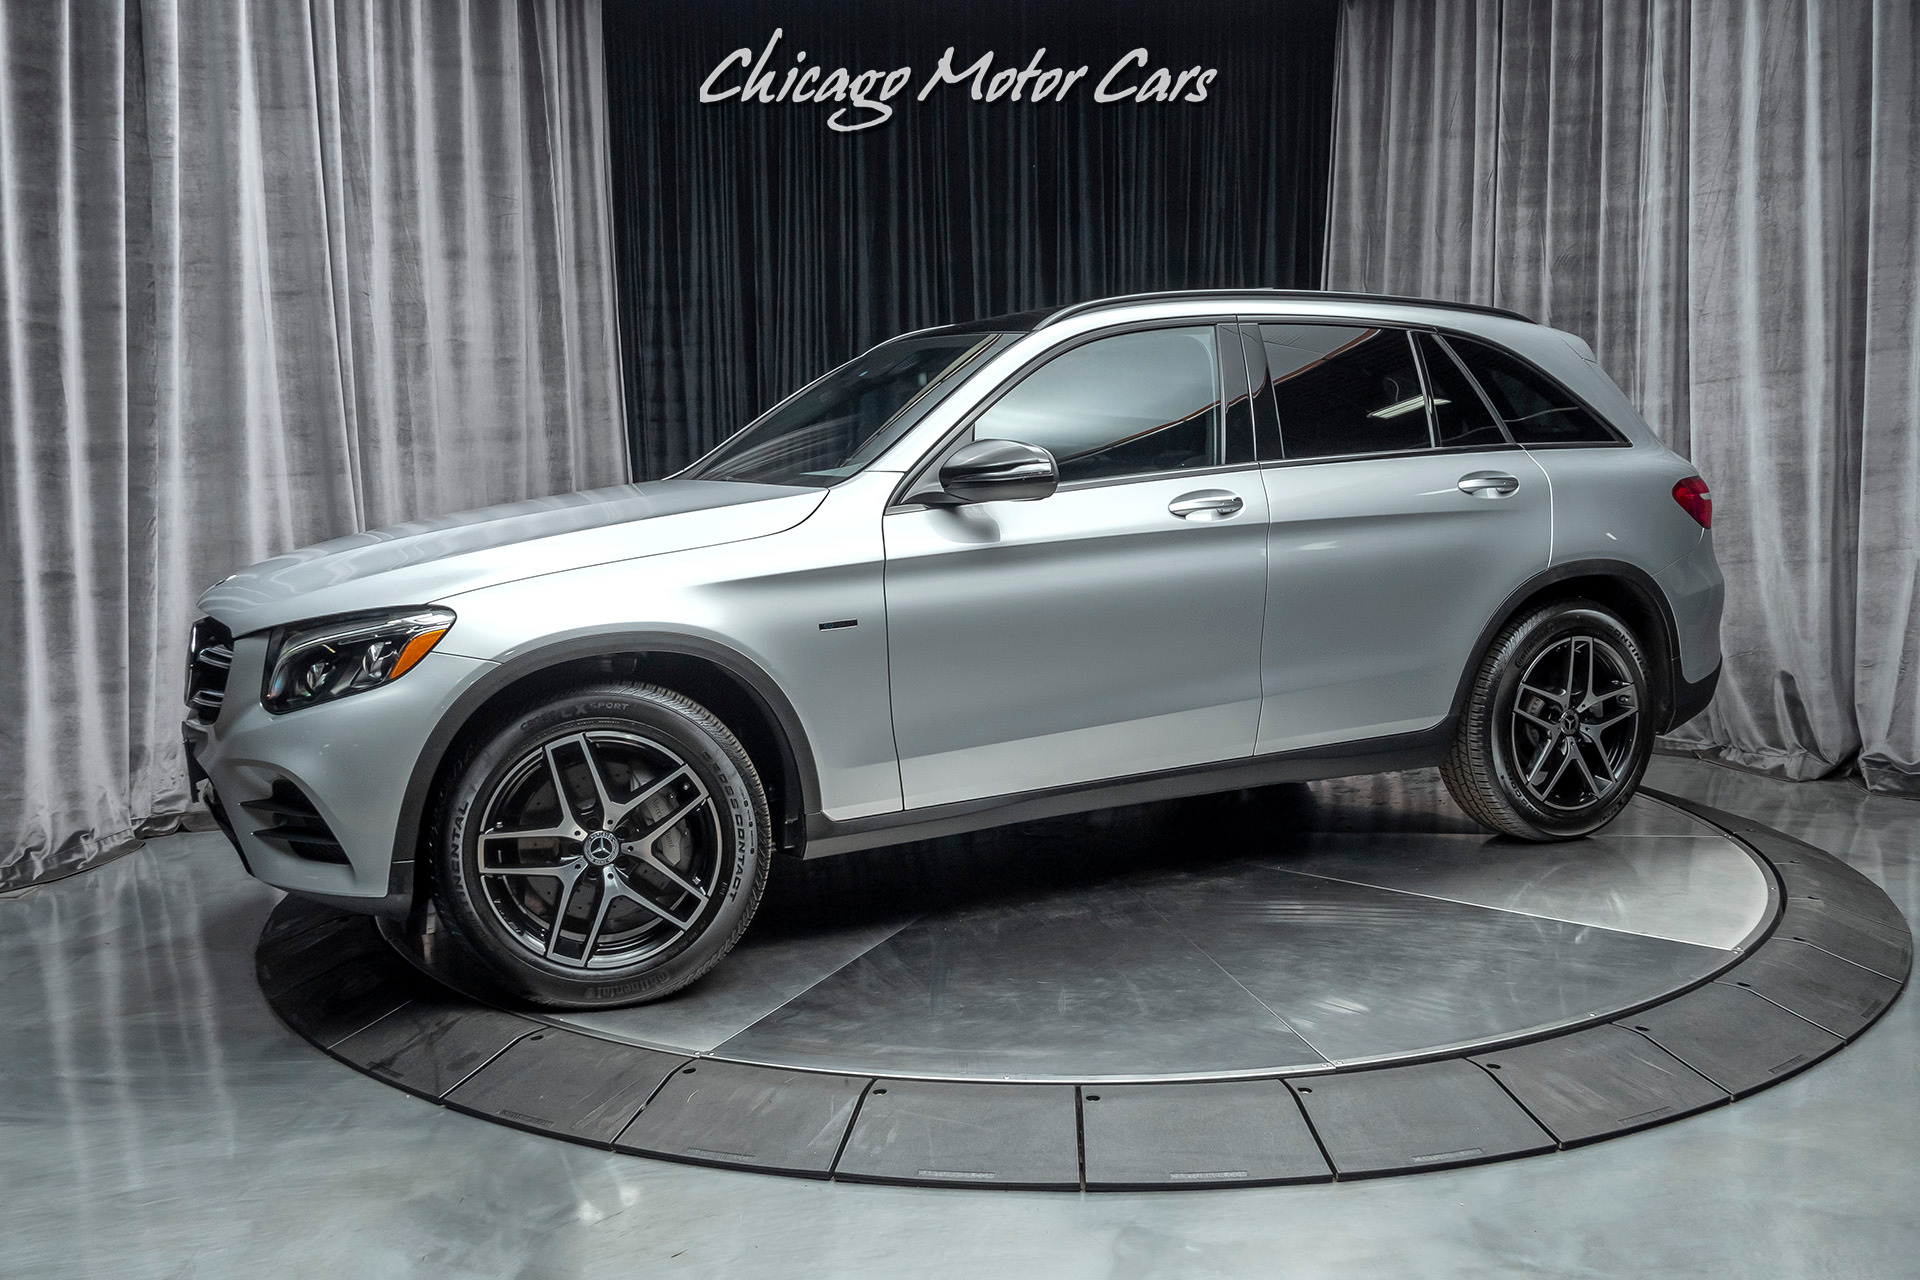 Used 2019 Mercedes-Benz GLC350e 4 Matic GLC 350e 4MATIC SUV MSRP $65k+ ONLY  5,200 MILES! For Sale (Special Pricing) | Chicago Motor Cars Stock #17603